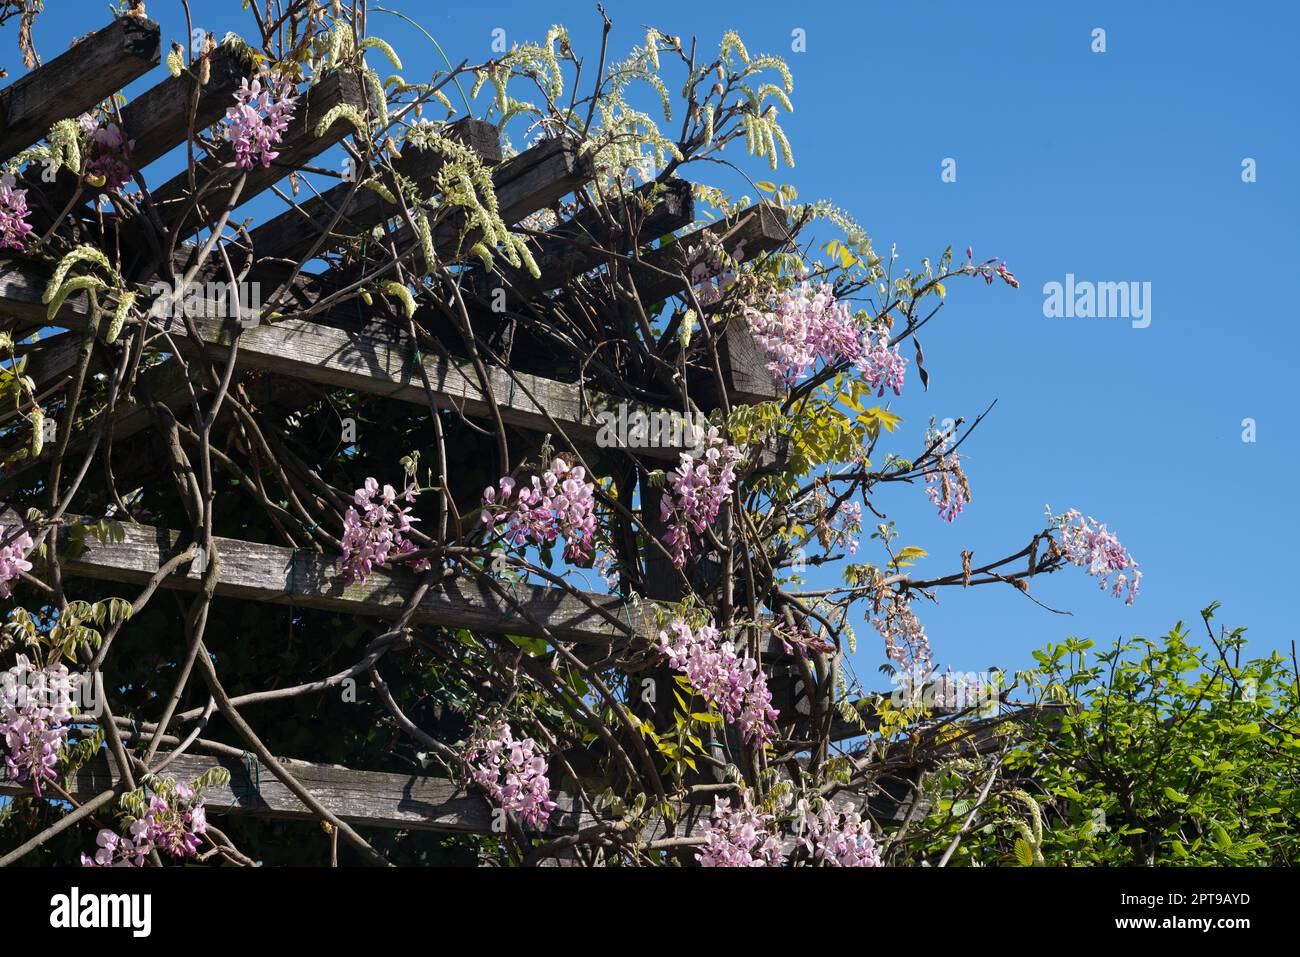 In spring the wisteria blooms, the pink-petaled flowers descend in clusters from the pergola into the flower garden. Stock Photo